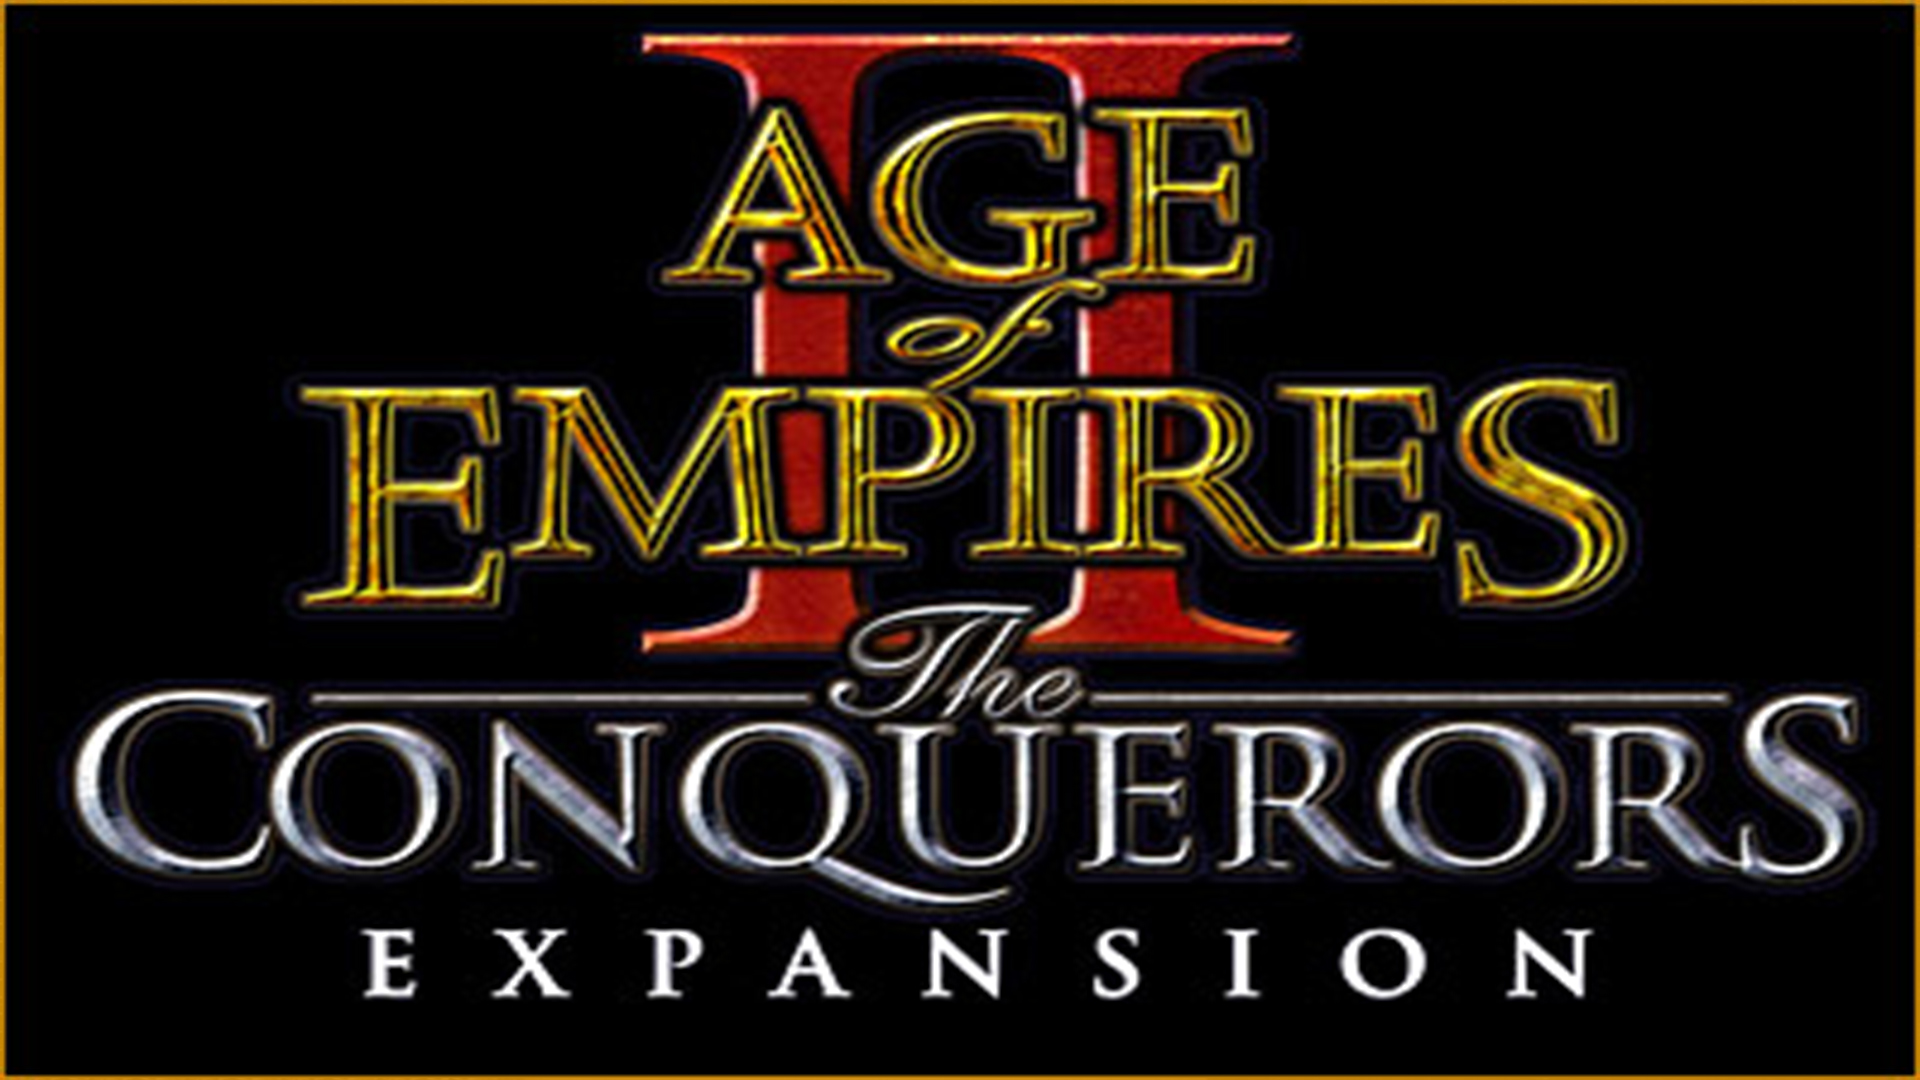 Age of Empires II: The Conquerors Expansion